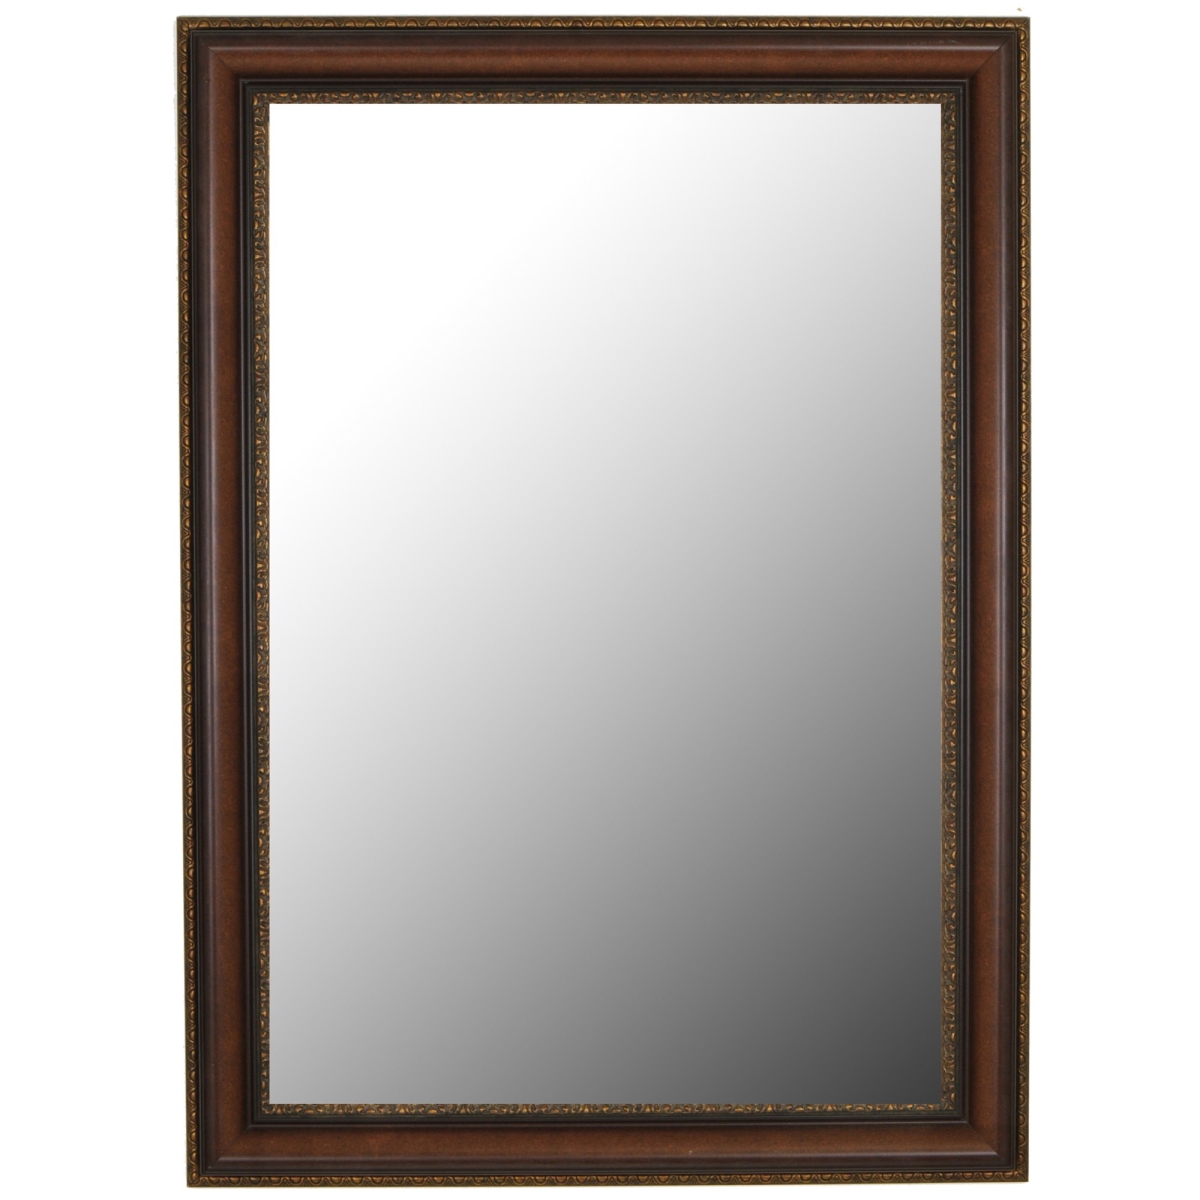 Hitchcock Butterfield 810501 Brown Janette Wall Mirror - 23.5 X 59.5 In.